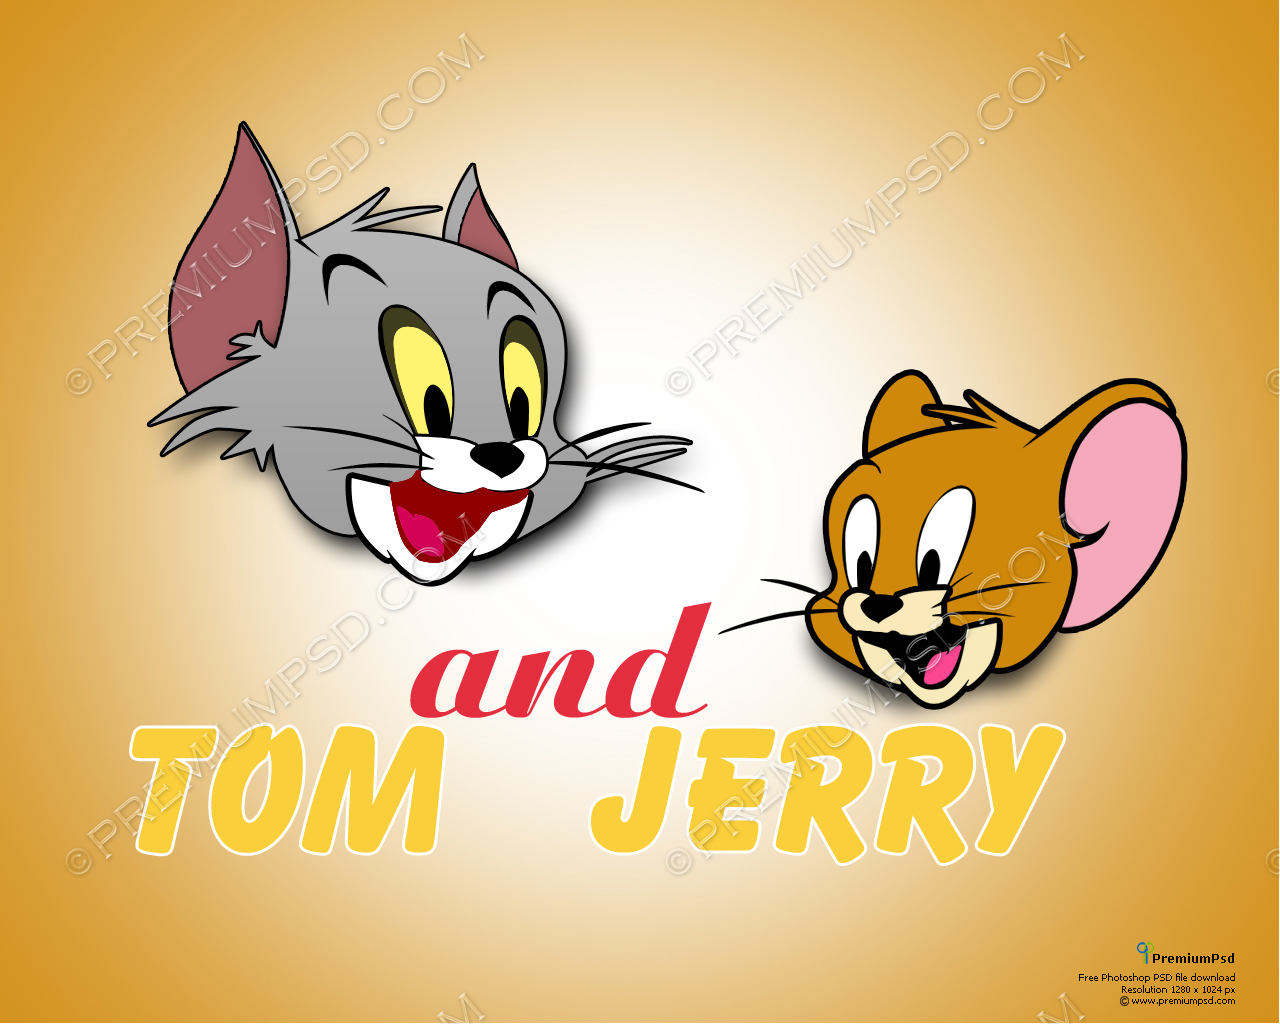 tom and jerry cartoon head picture, tom and jerry cartoon head wallpaper